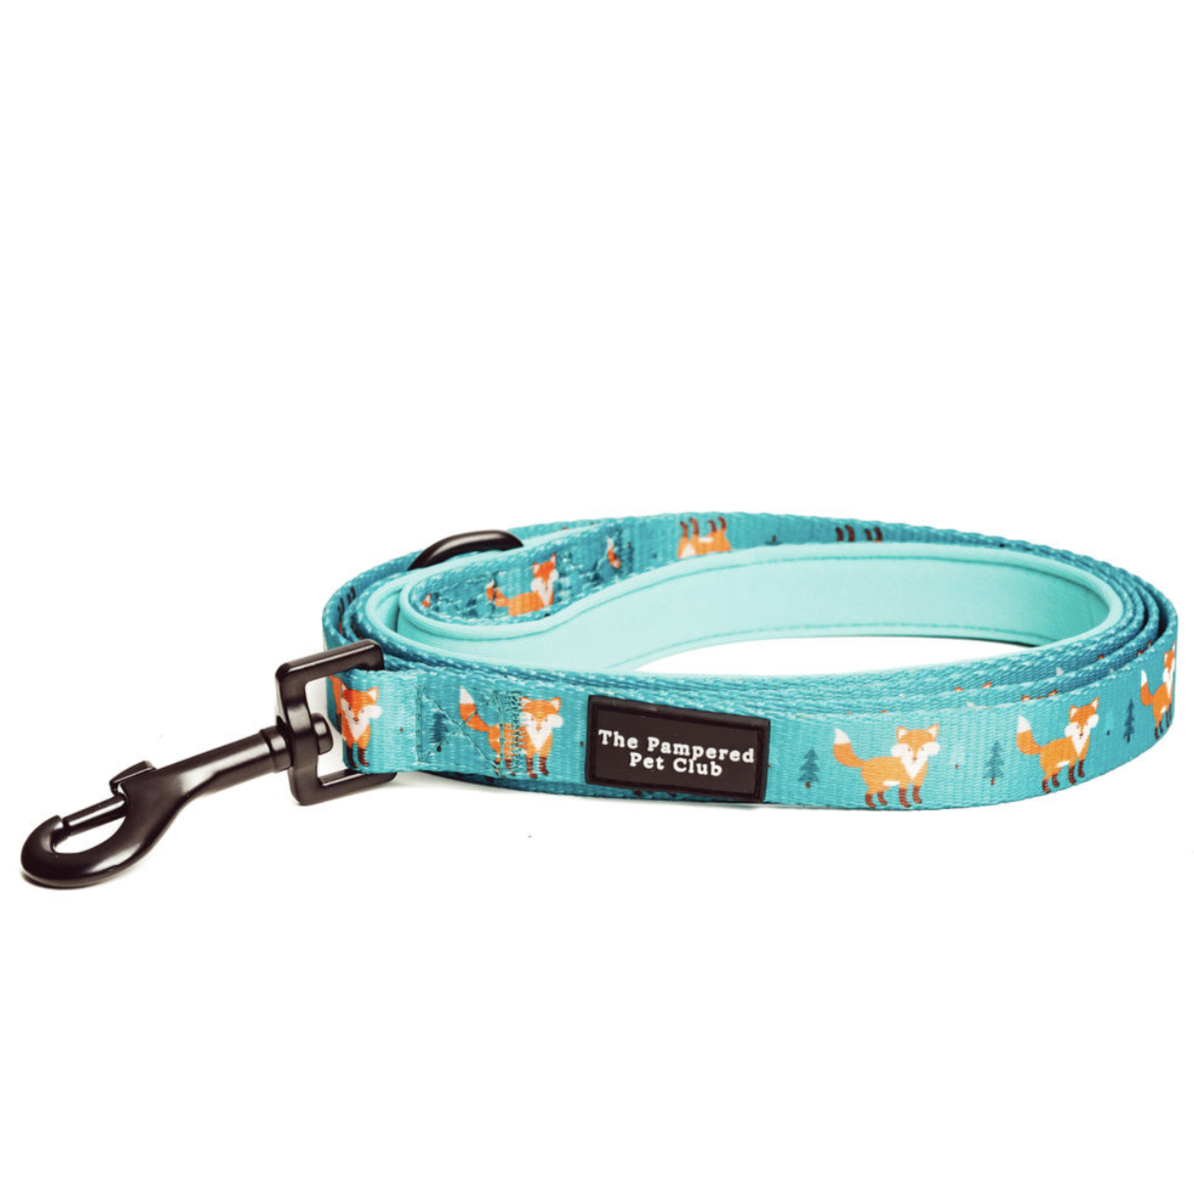 The Pampered Pet Club Foxy Lead 